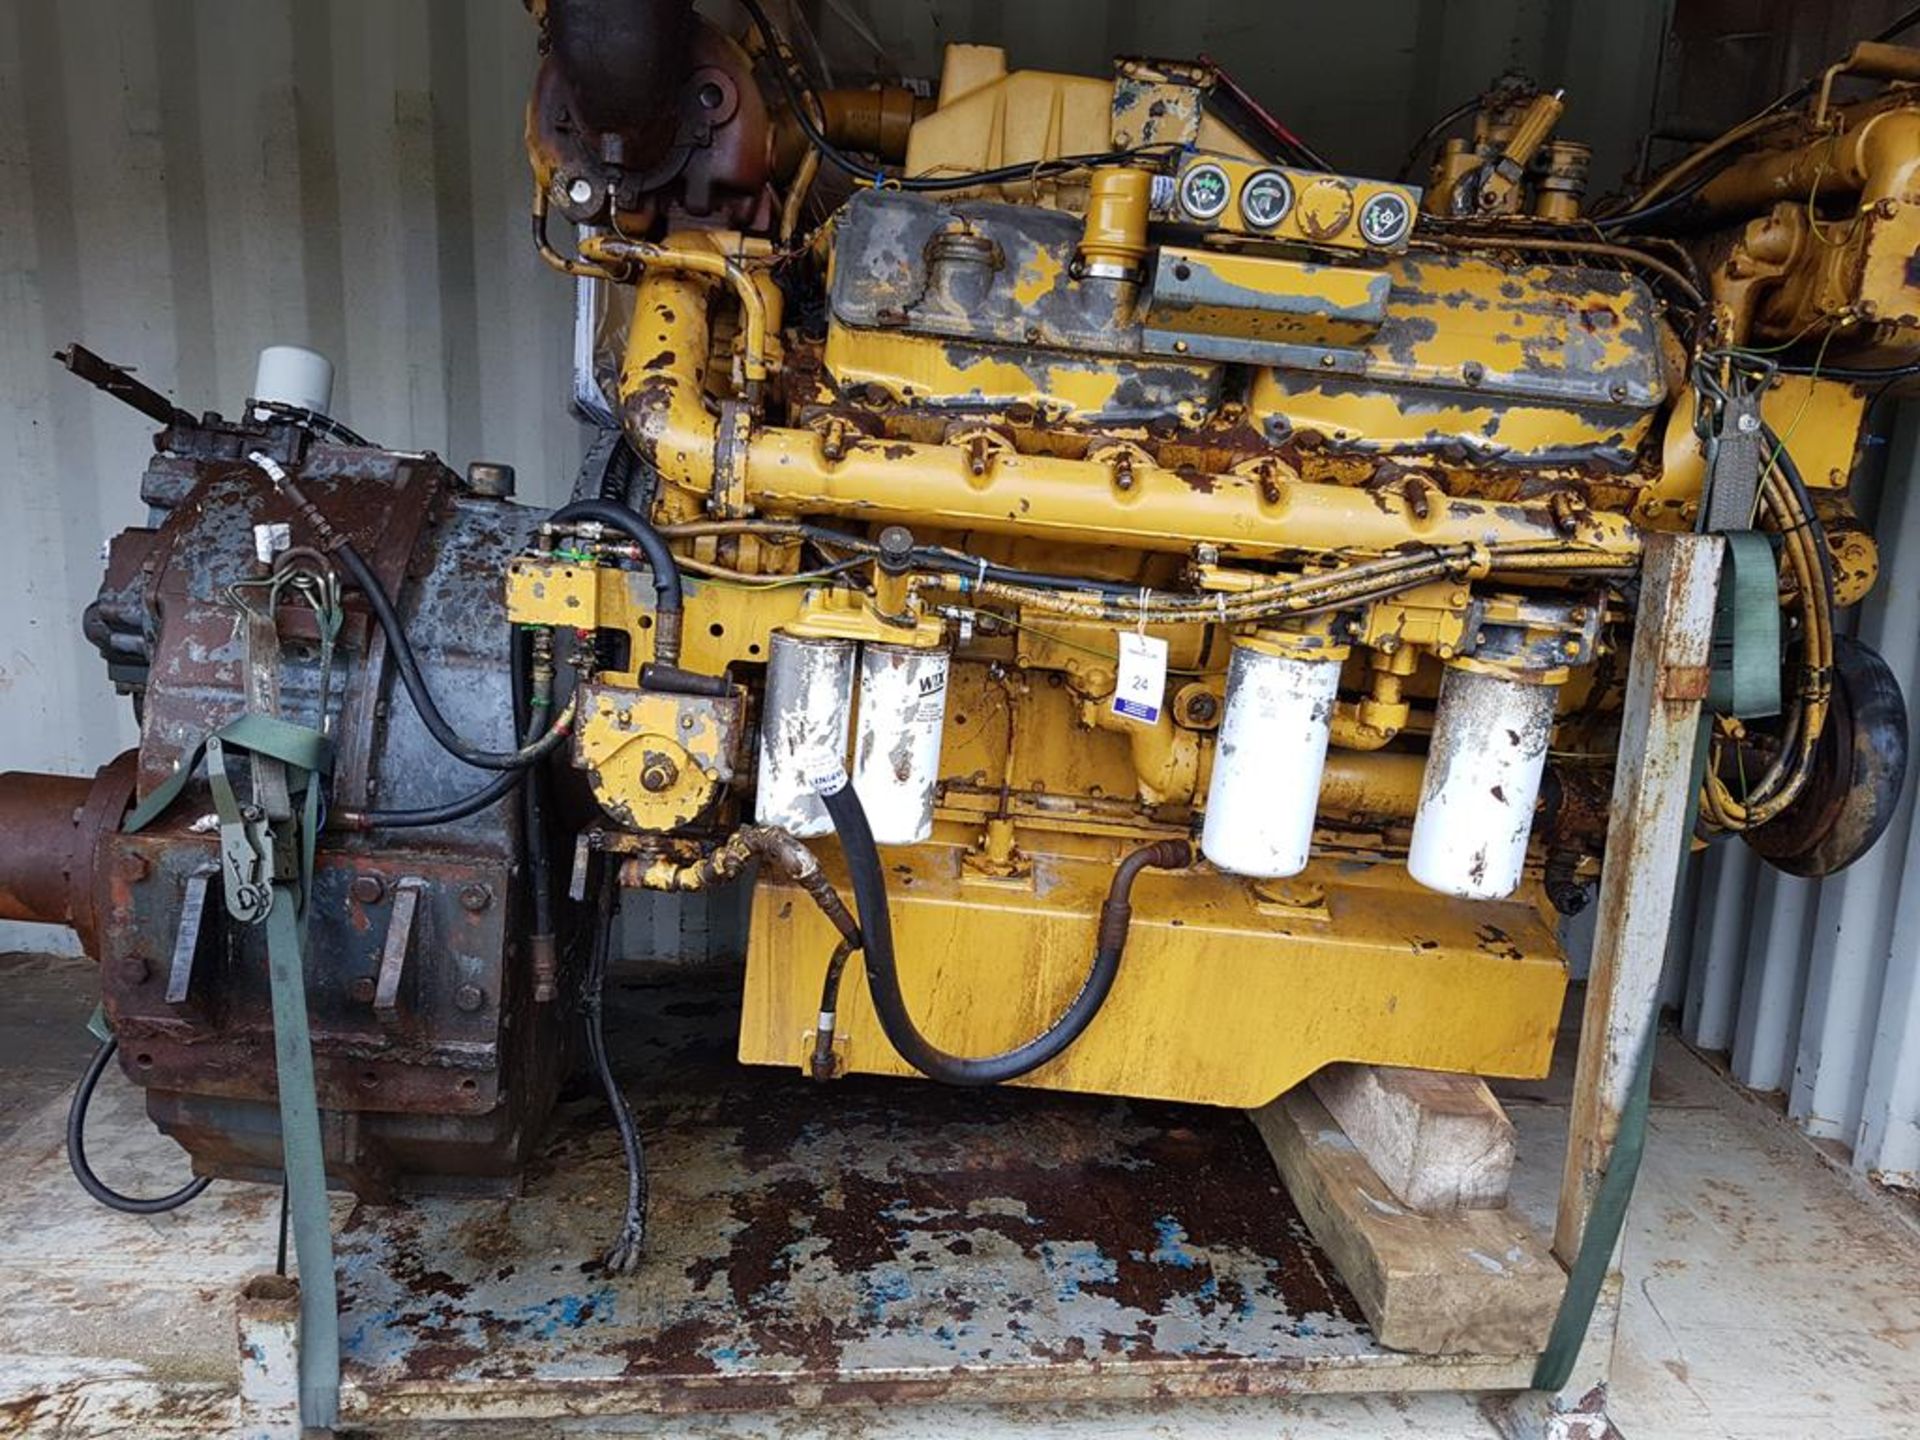 Caterpillar 3412T Marine Diesel Engine with MG520 Gearbox, used